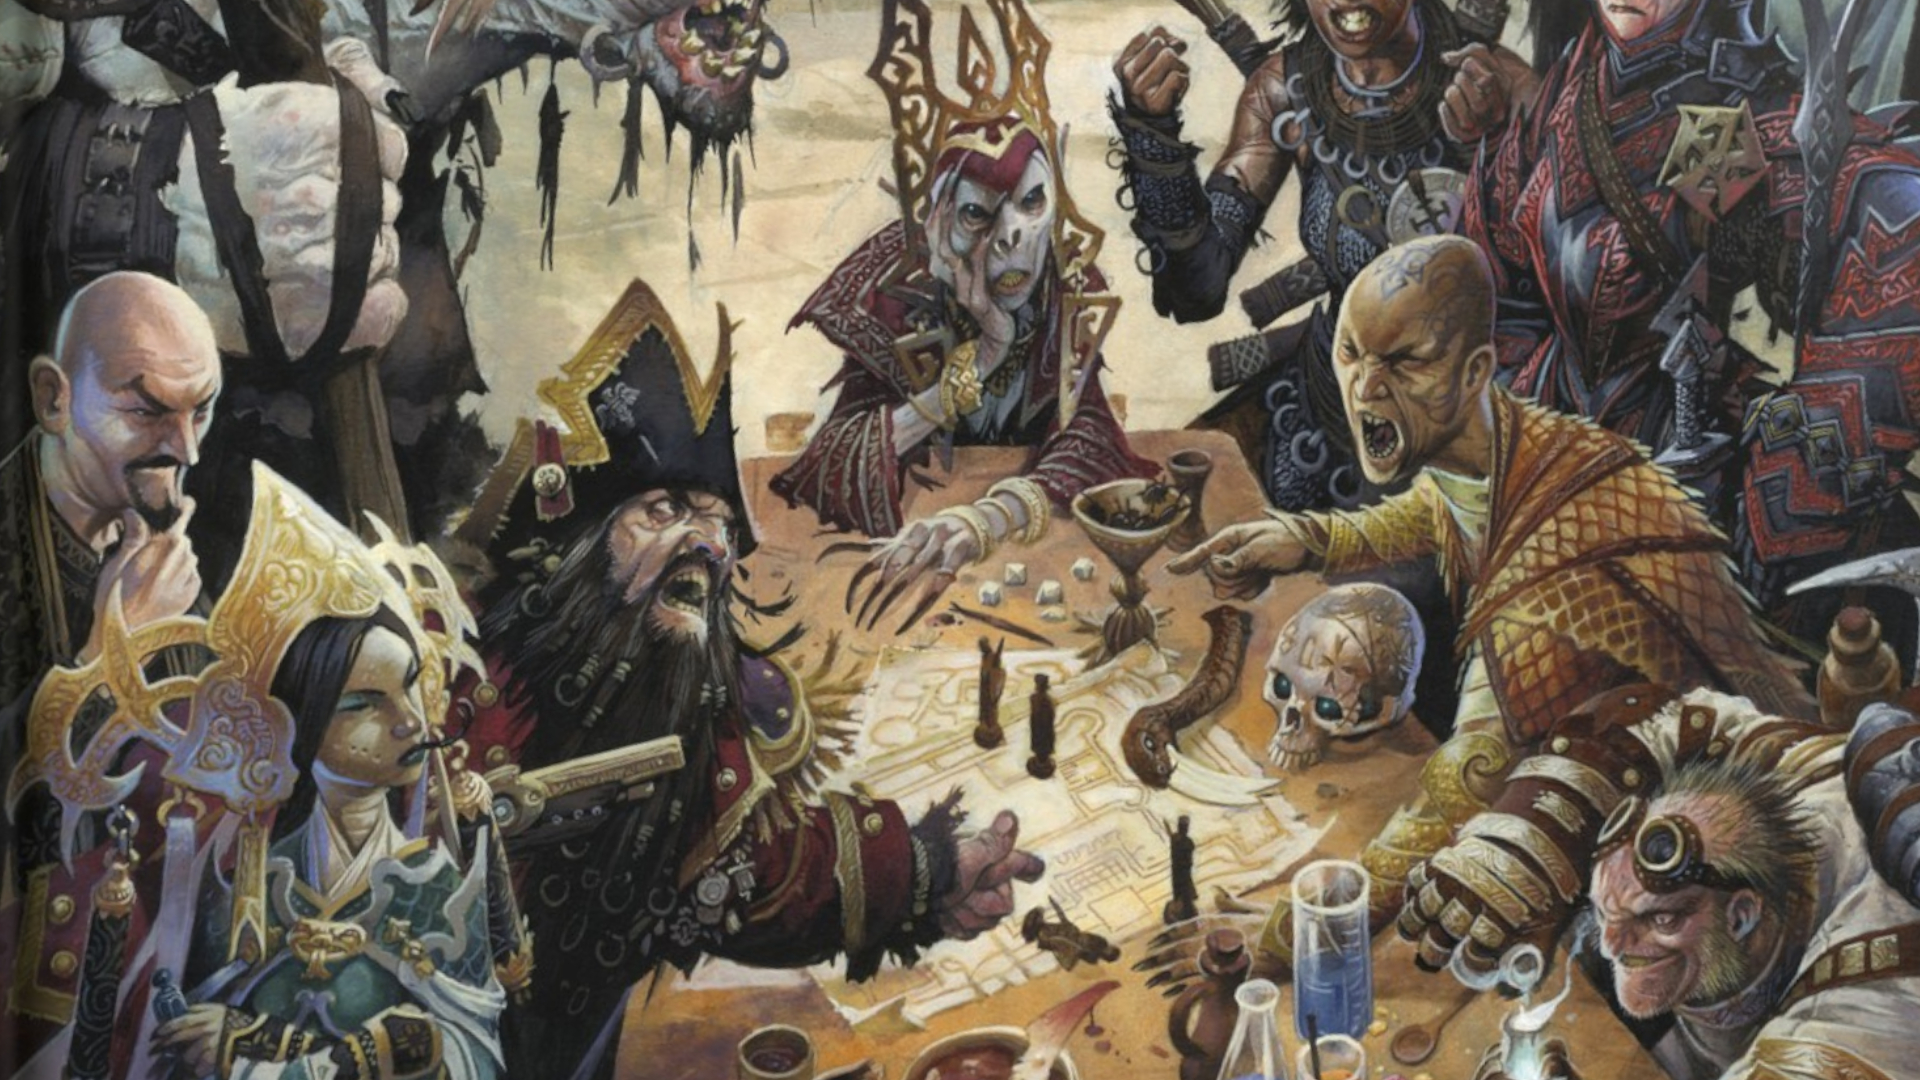 Monstrous and humanoid beings sit around a table